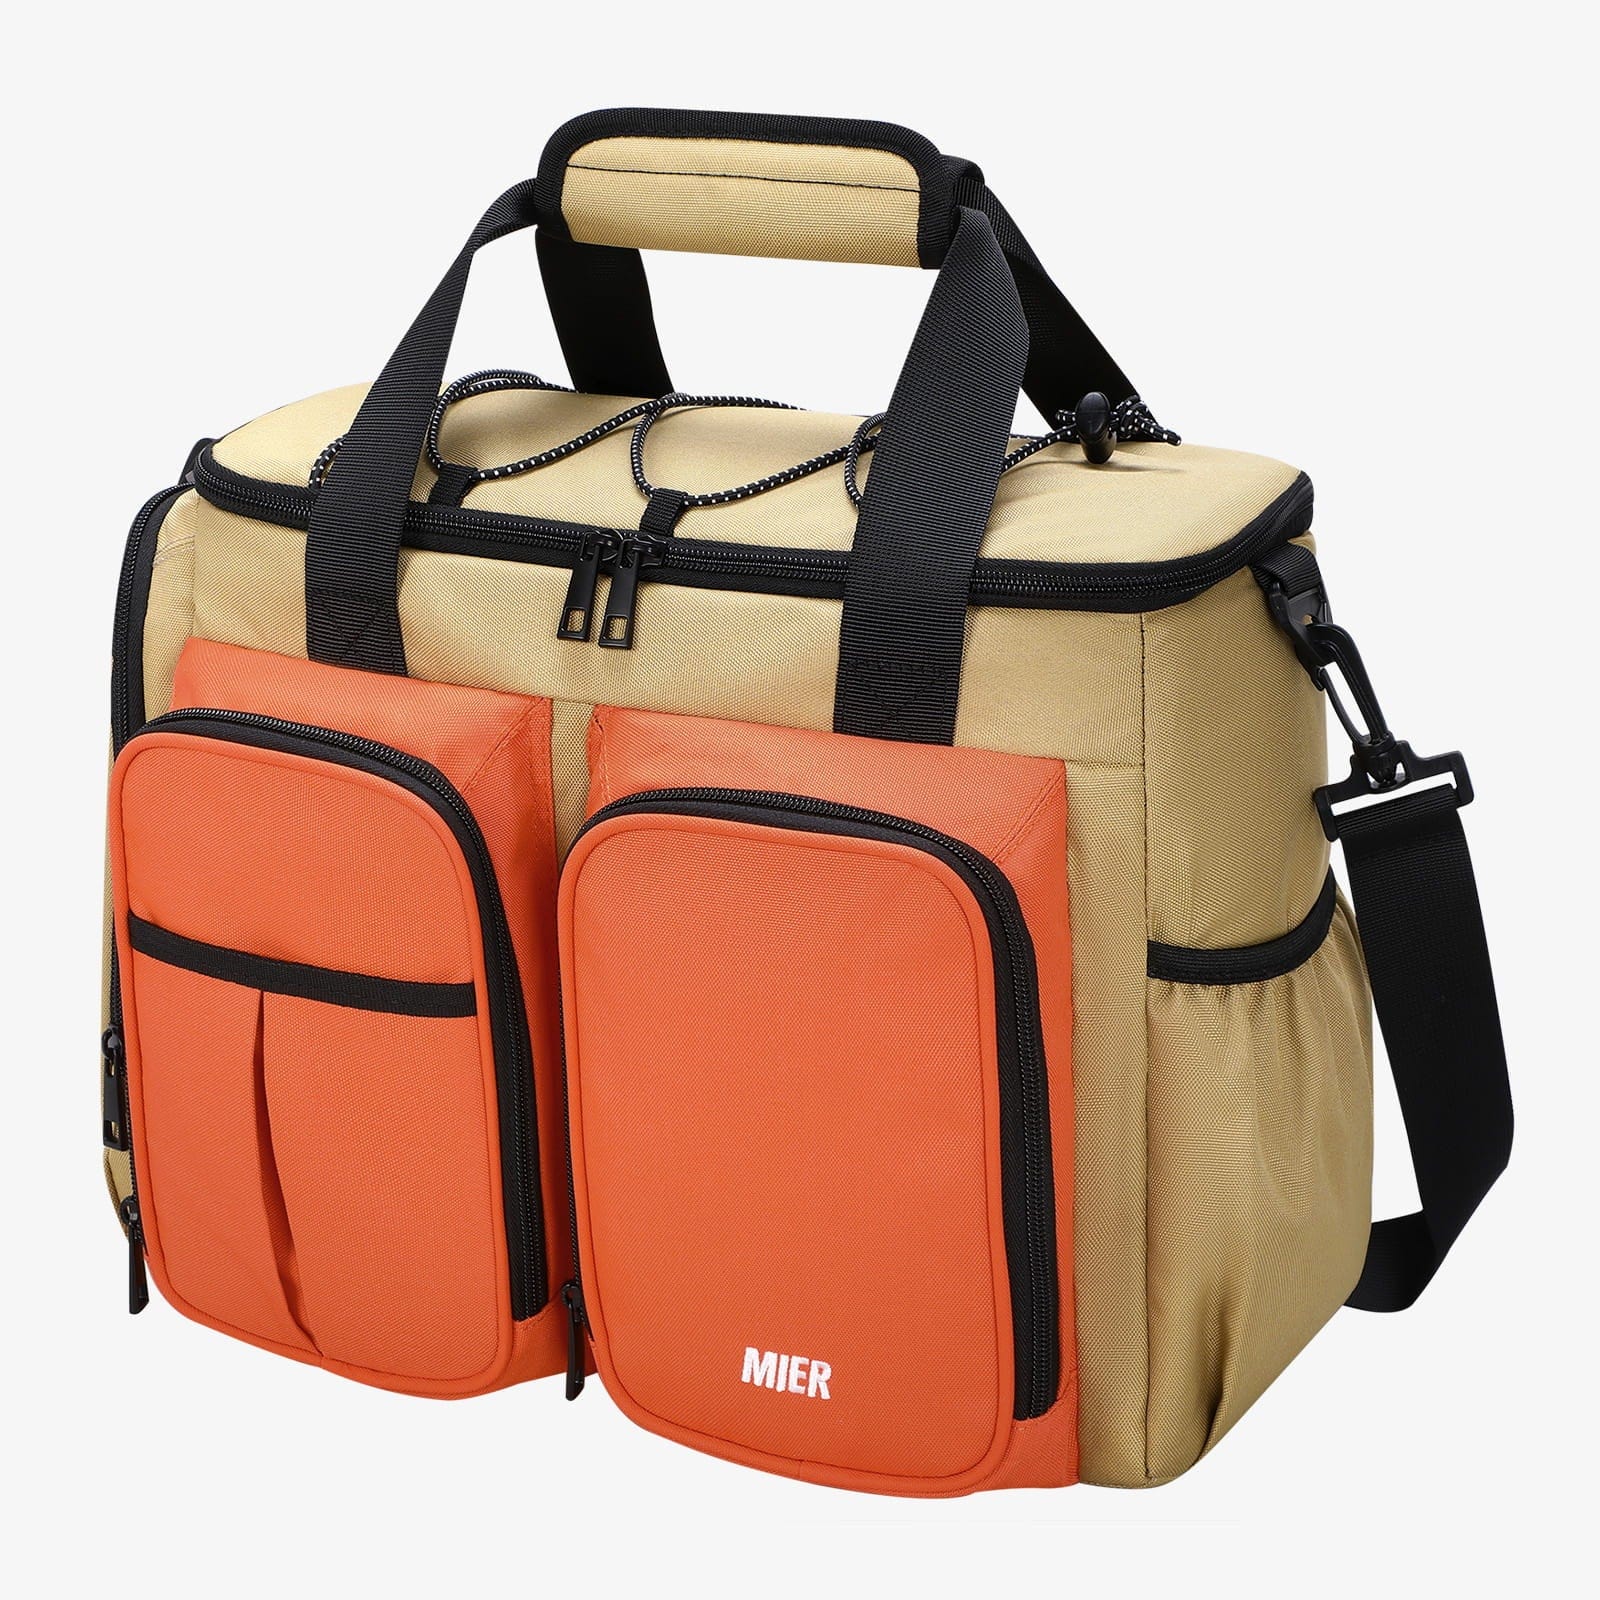 Mier Large Insulated Leakproof Lunch Cooler Bag with Multiple Pockets, Khaki Orange